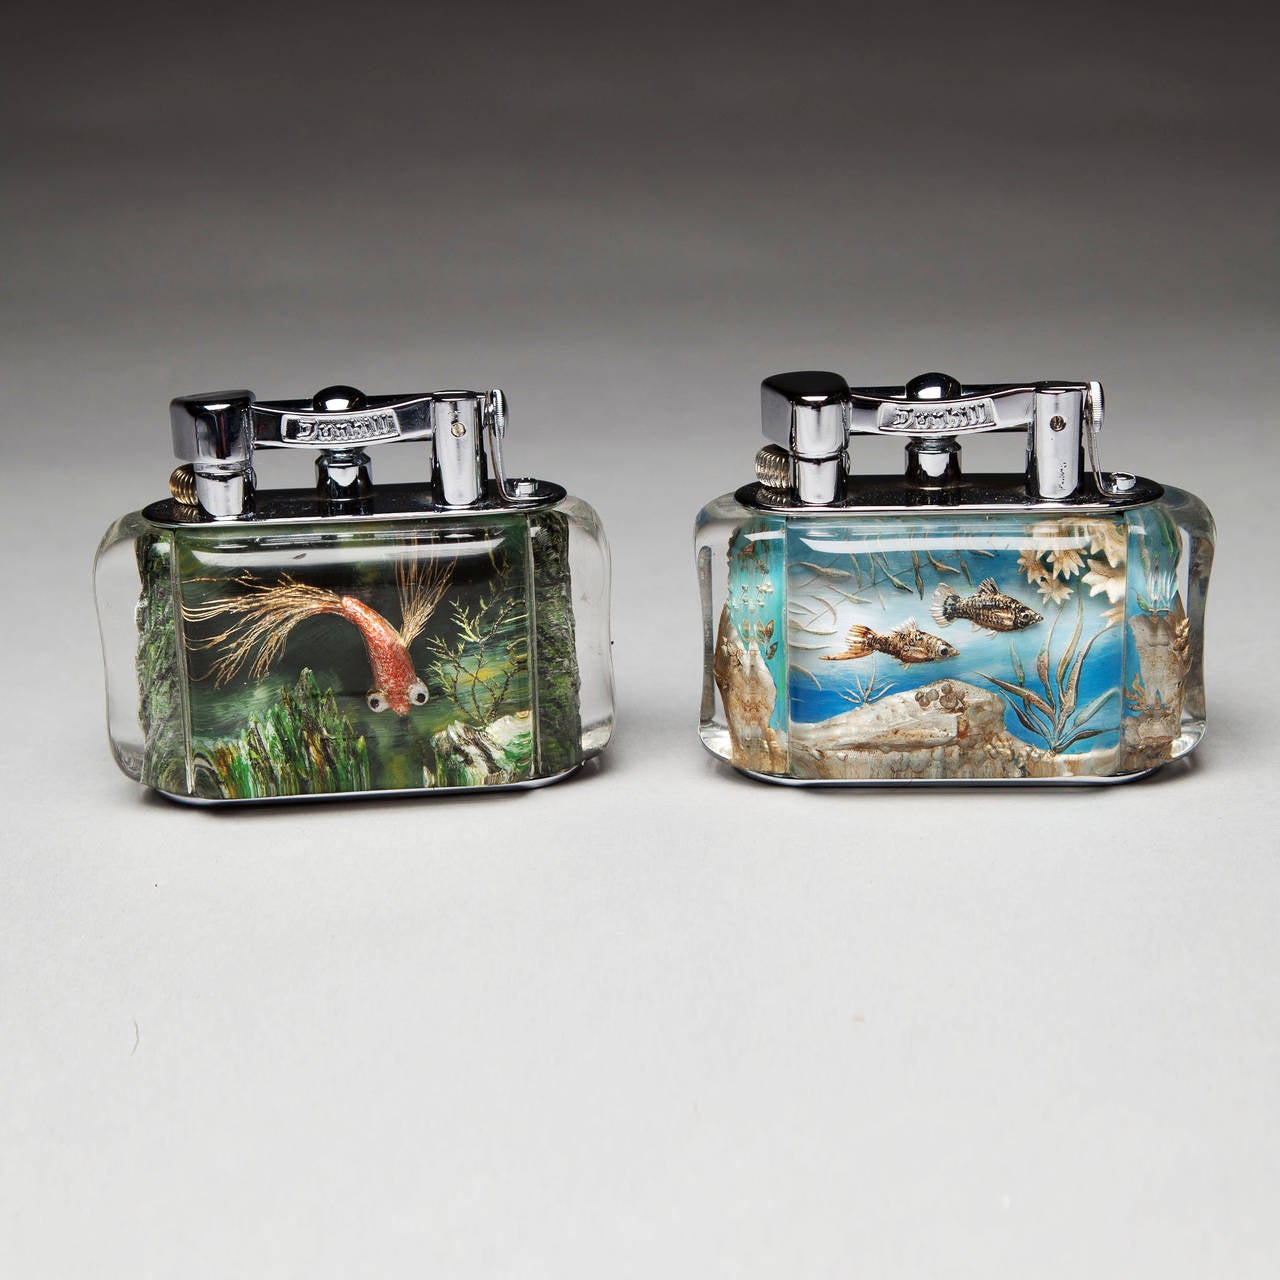 Two very bright and well preserved chrome plated Dunhill Aquarium Table lighters, the lucite panels boldly cut and reverse painted with well studied fresh water fish among reeds and rocks.   

In perfect working order.

England, circa 1950-60